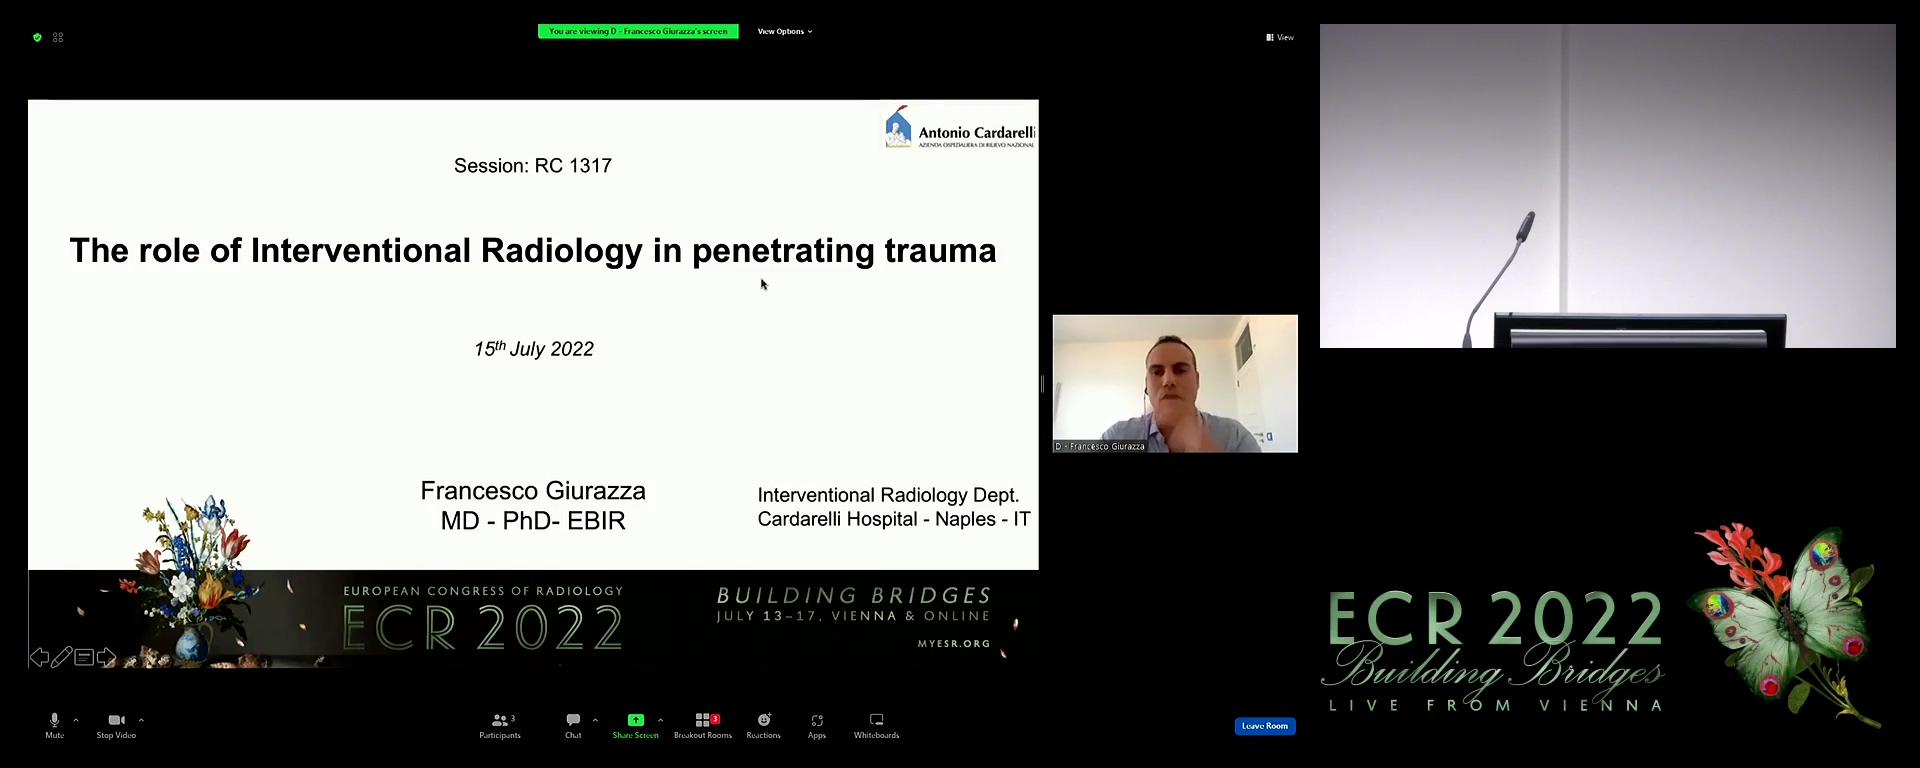 The role of interventional radiology in penetrating trauma - Francesco Giurazza, Naples / IT